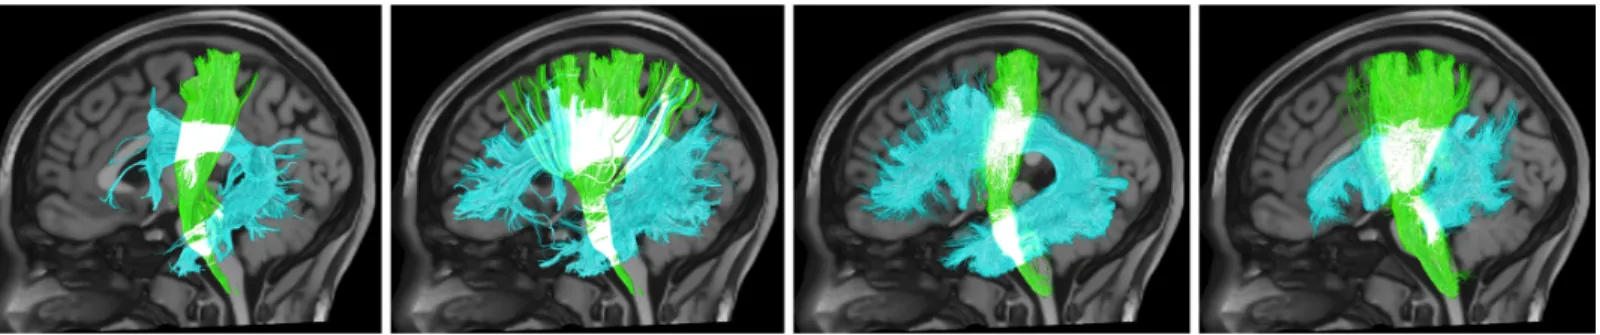 Figure 1. Variation in white matter bundle segmentation. Four example segmentations of the corticospinal tract (green) and arcuate fasciculus  (cyan) show variability in the size, shape, densities, and connections of these reconstructed white matter pathwa